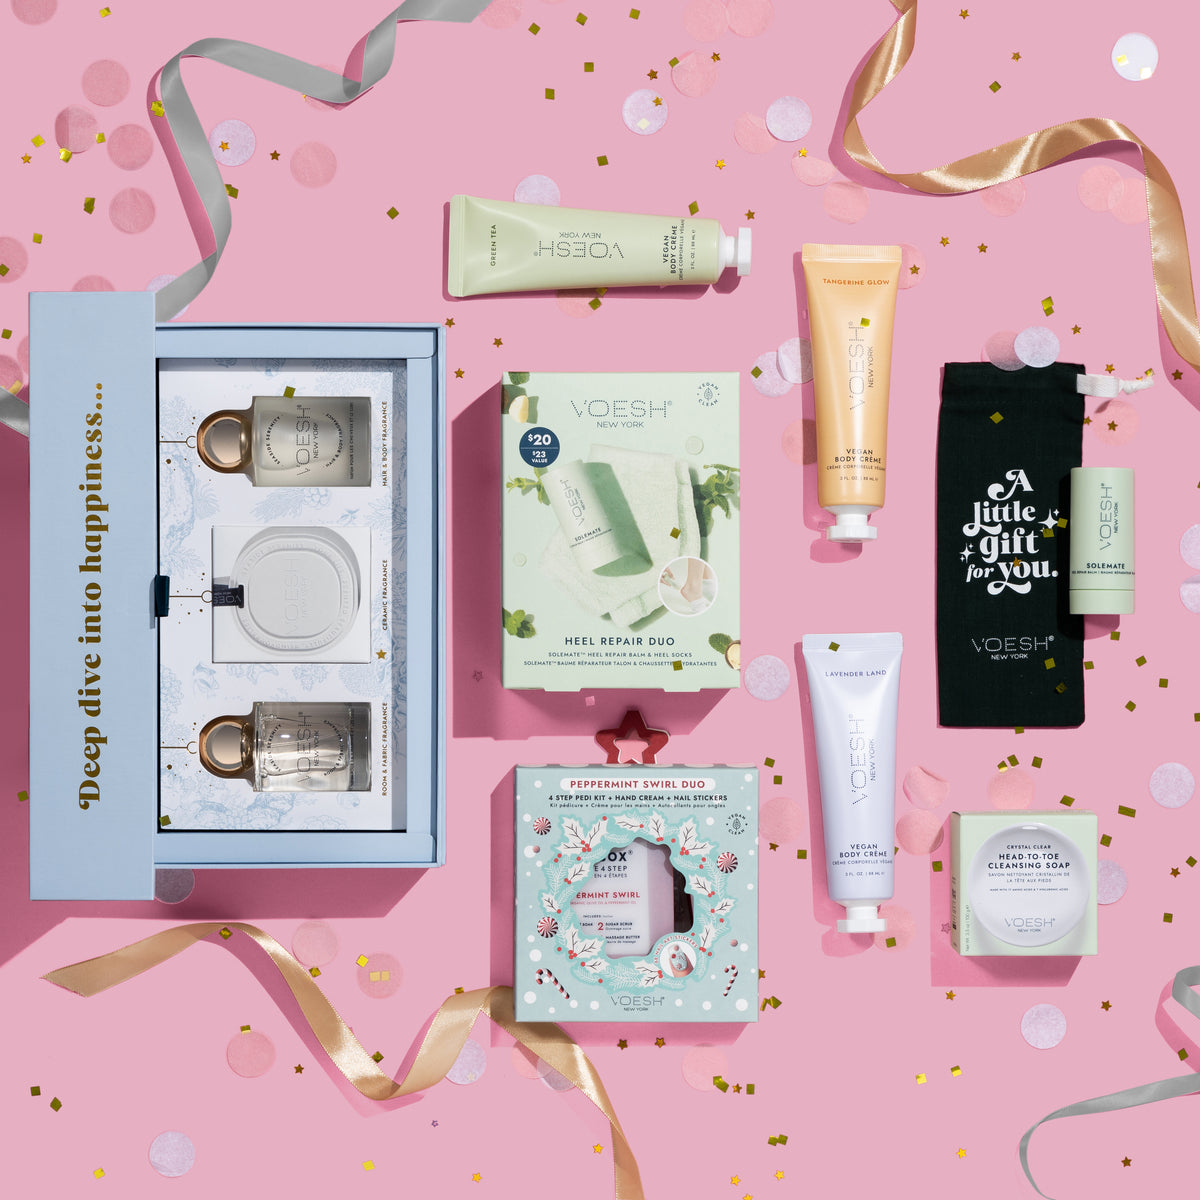 Fragrance set, Lotions, Solemate Heel Repair Balm, Peppermint Swirl Duo, Crystal Clear Soap on a flatlay pink background with various ribbons and confetti surrounding the products